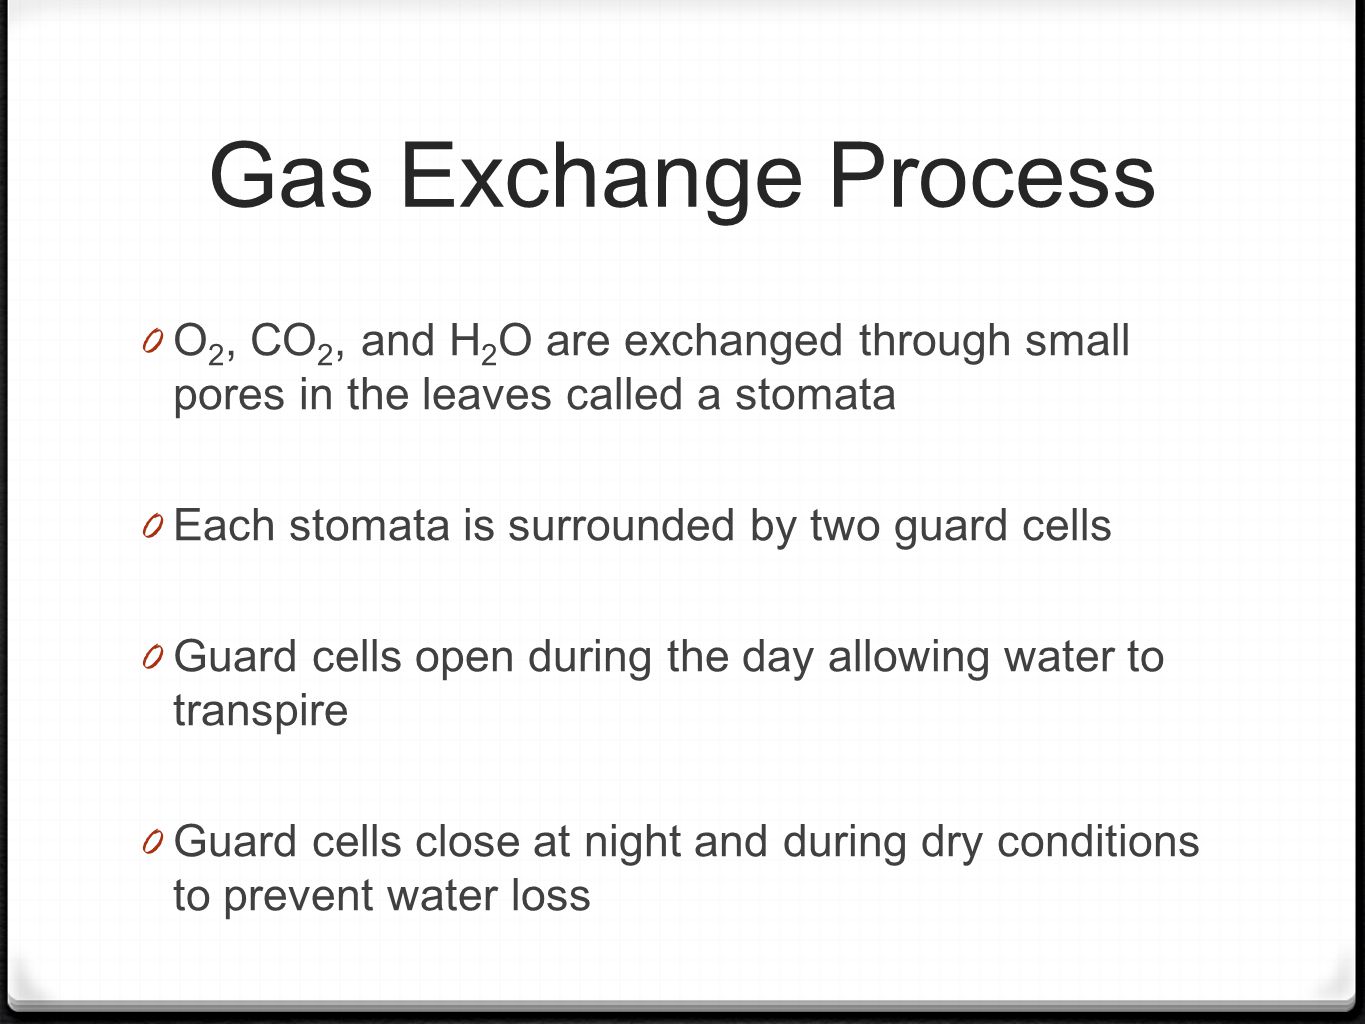 Gas Exchange Process 0 O 2, CO 2, and H 2 O are exchanged through small pores in the leaves called a stomata 0 Each stomata is surrounded by two guard cells 0 Guard cells open during the day allowing water to transpire 0 Guard cells close at night and during dry conditions to prevent water loss